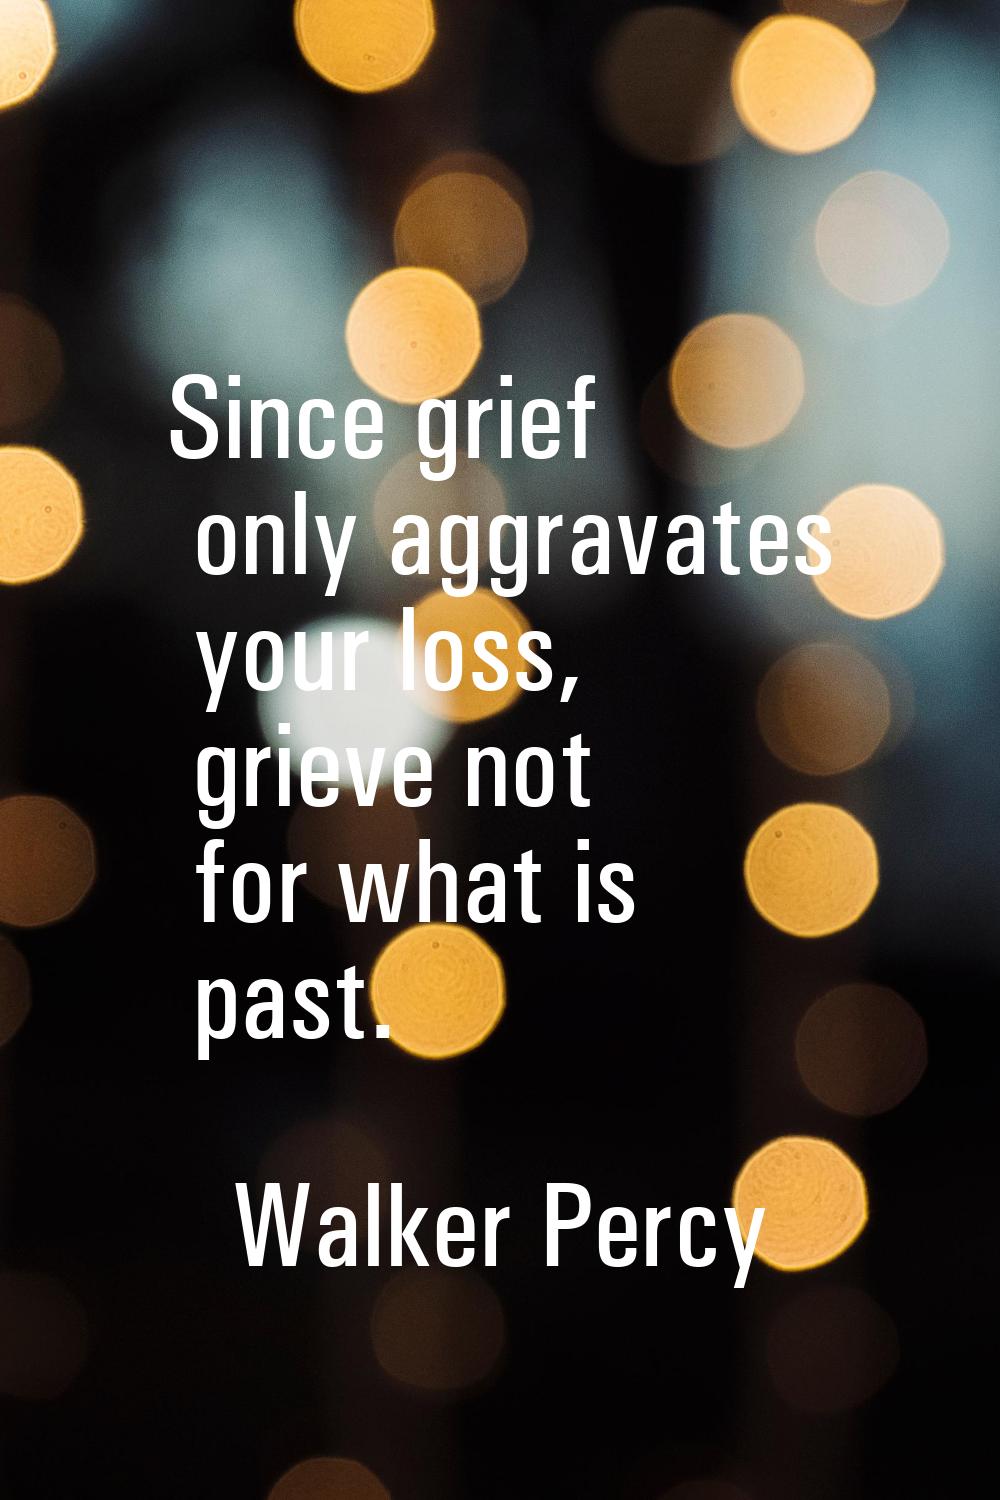 Since grief only aggravates your loss, grieve not for what is past.